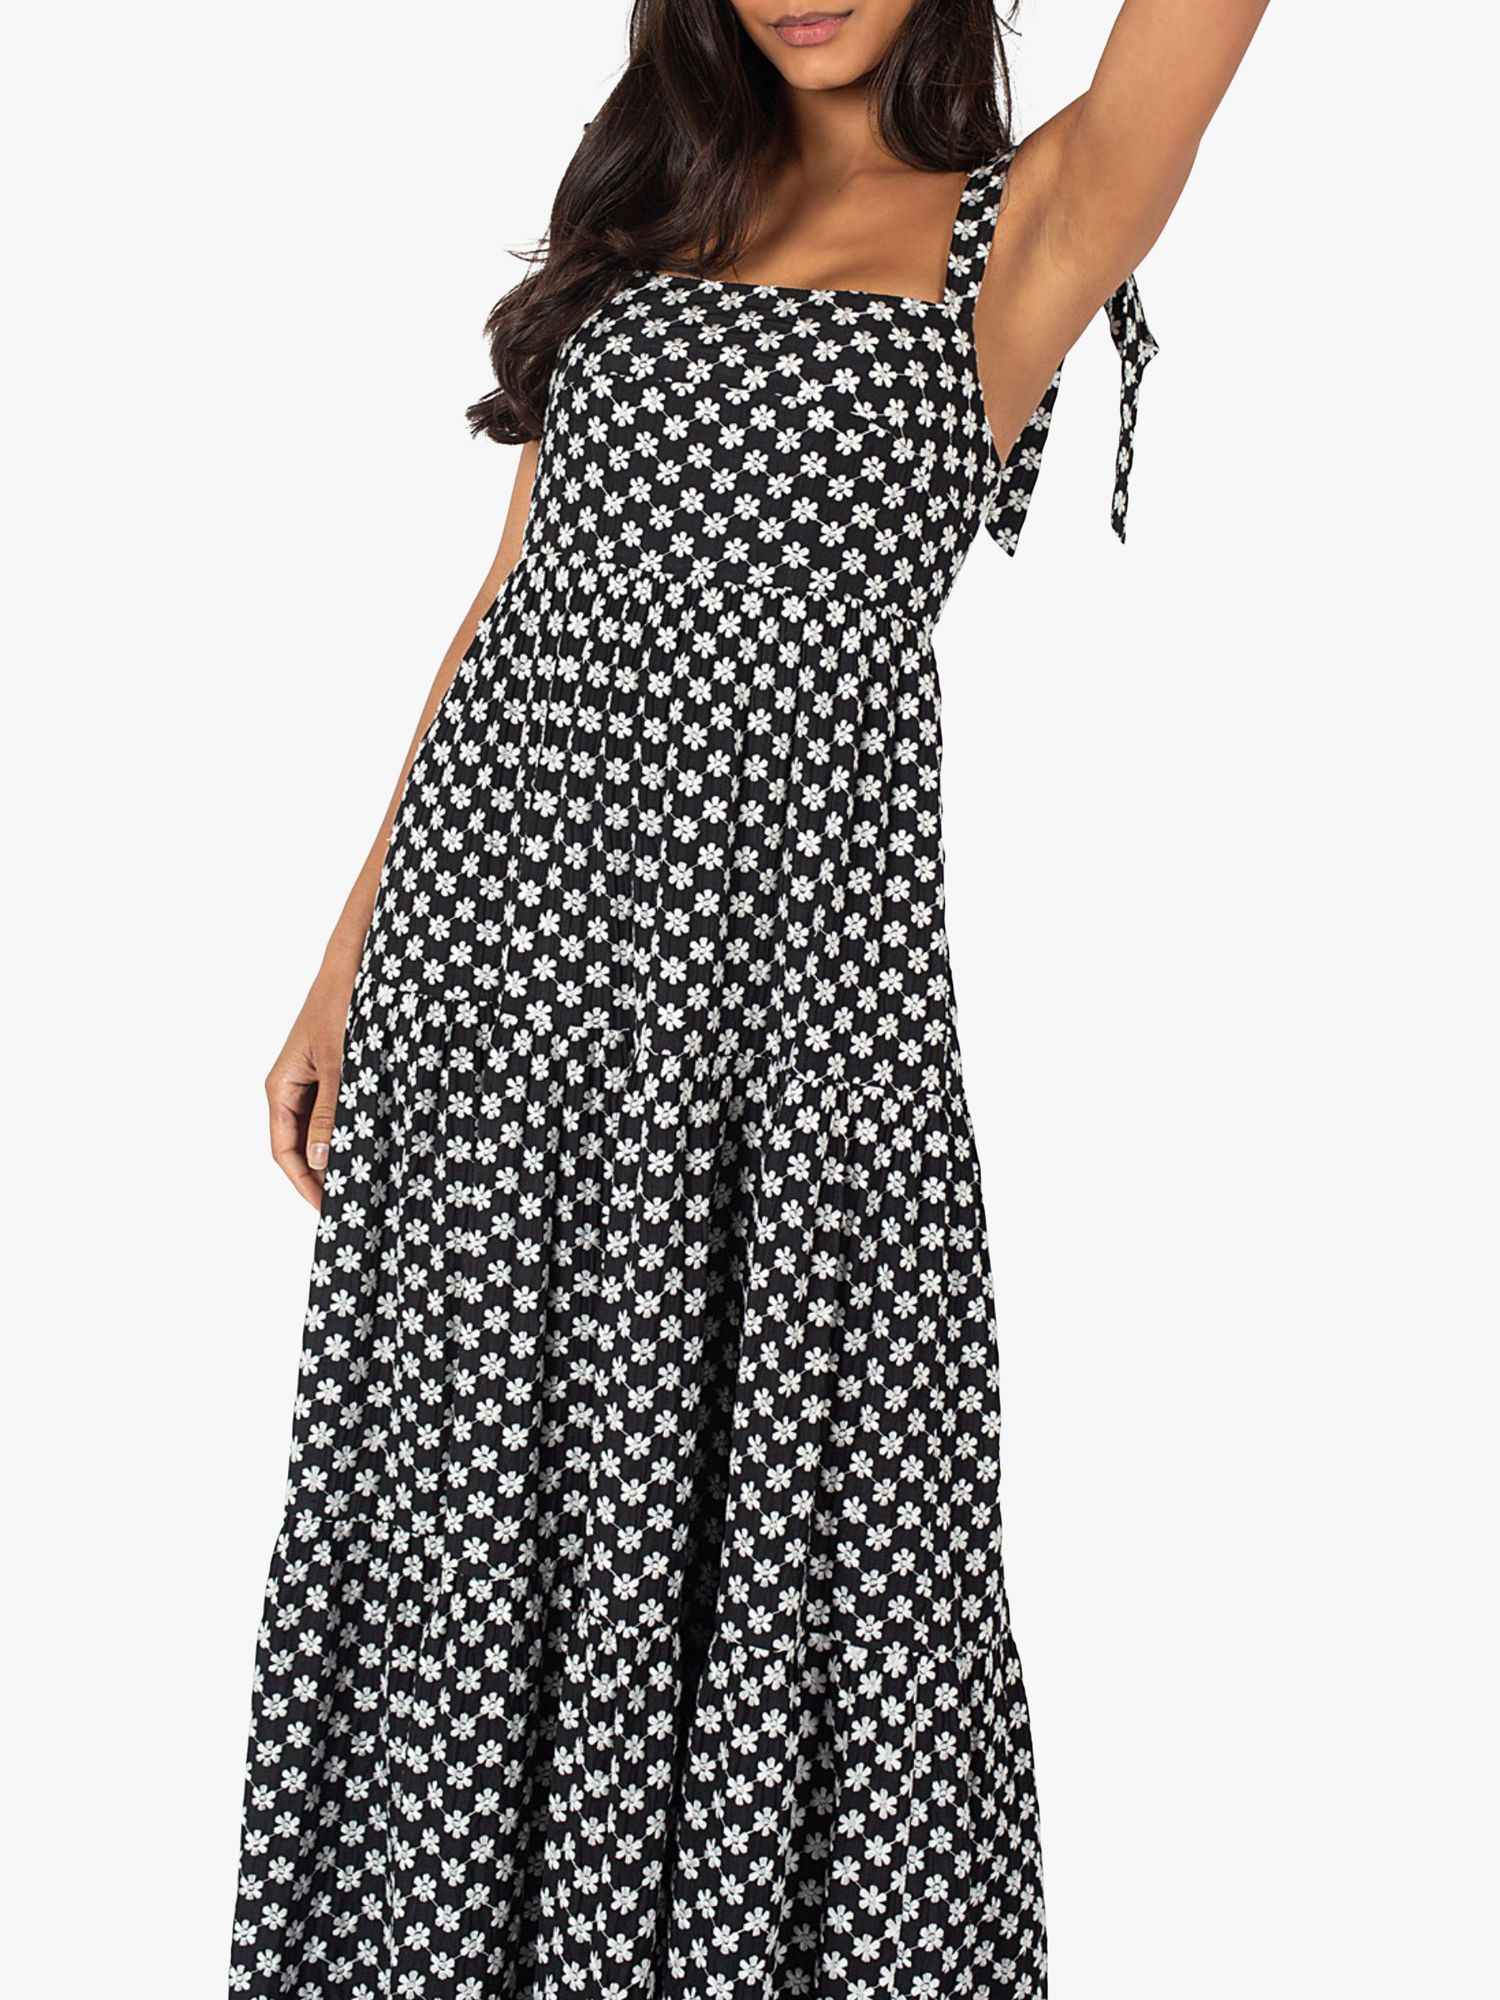 Buy Traffic People The Chorus Lily Cotton Dress, Black Online at johnlewis.com